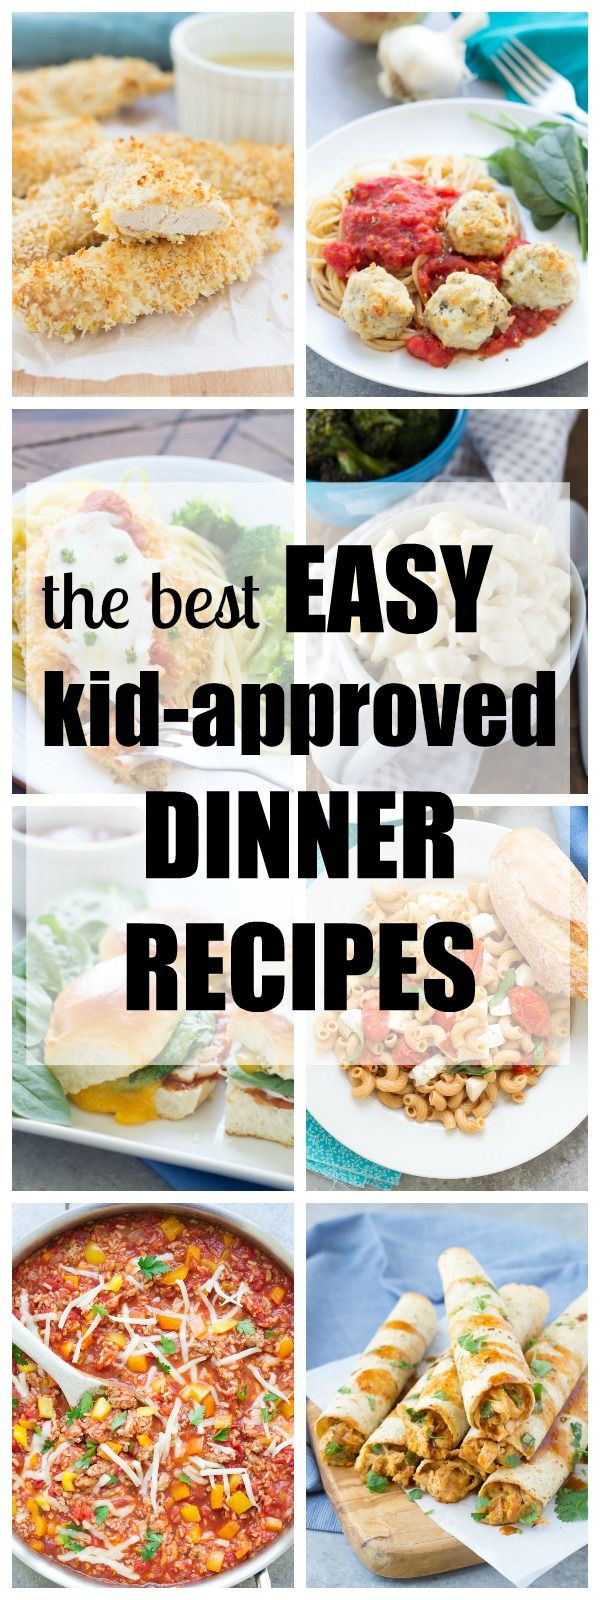 Kids Favorite Dinner Recipes
 Favorite kid friendly dinner recipes from my family to